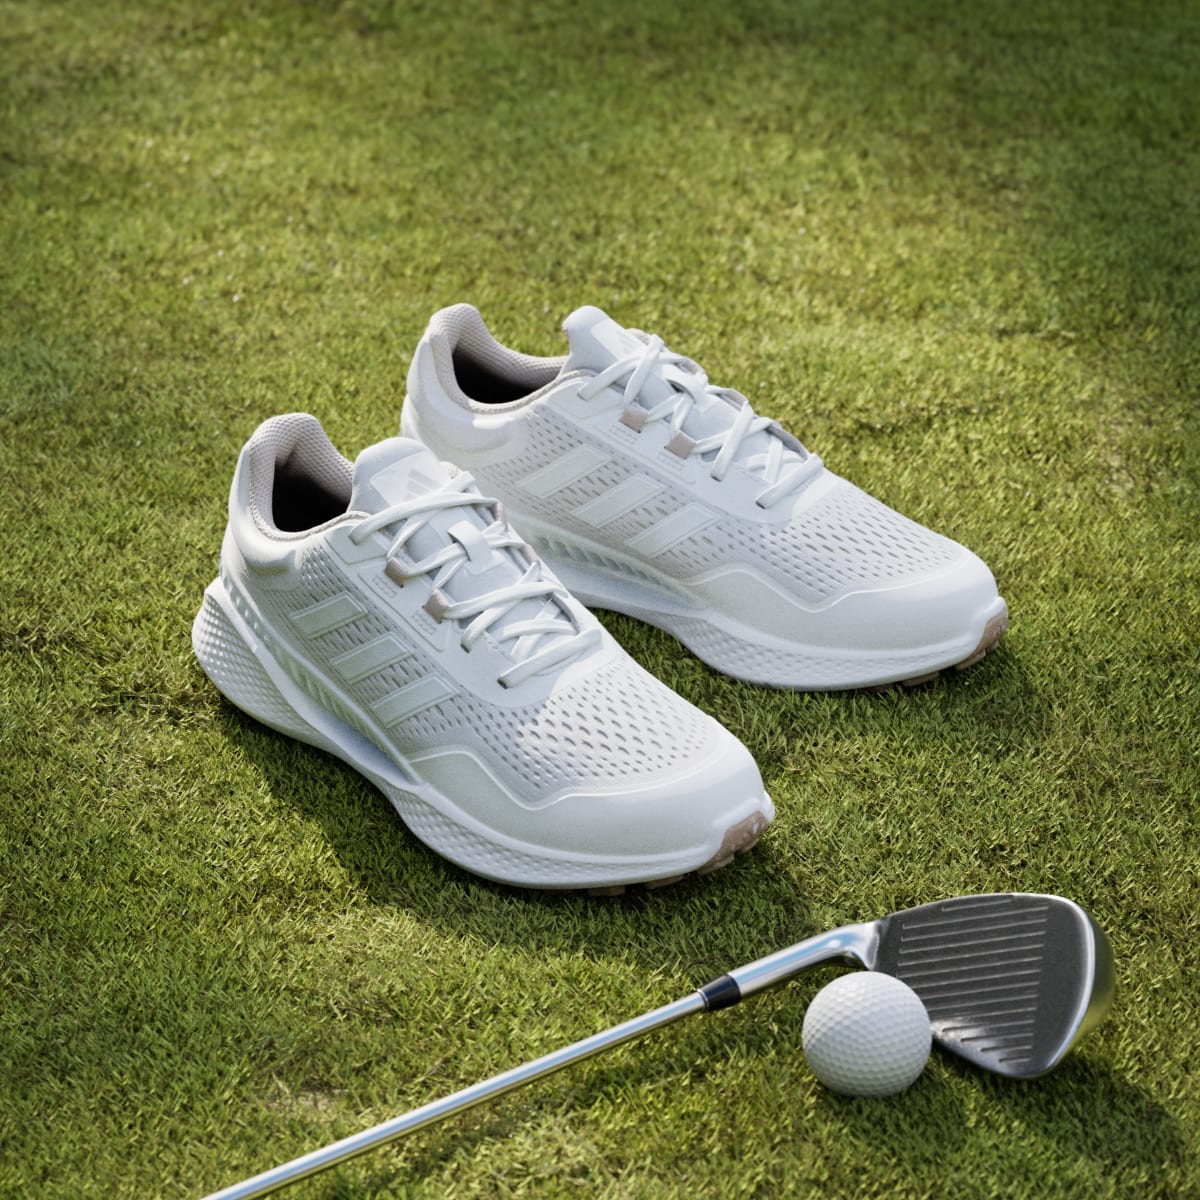 Adidas Summervent 24 Bounce Golf Shoes Low. 4